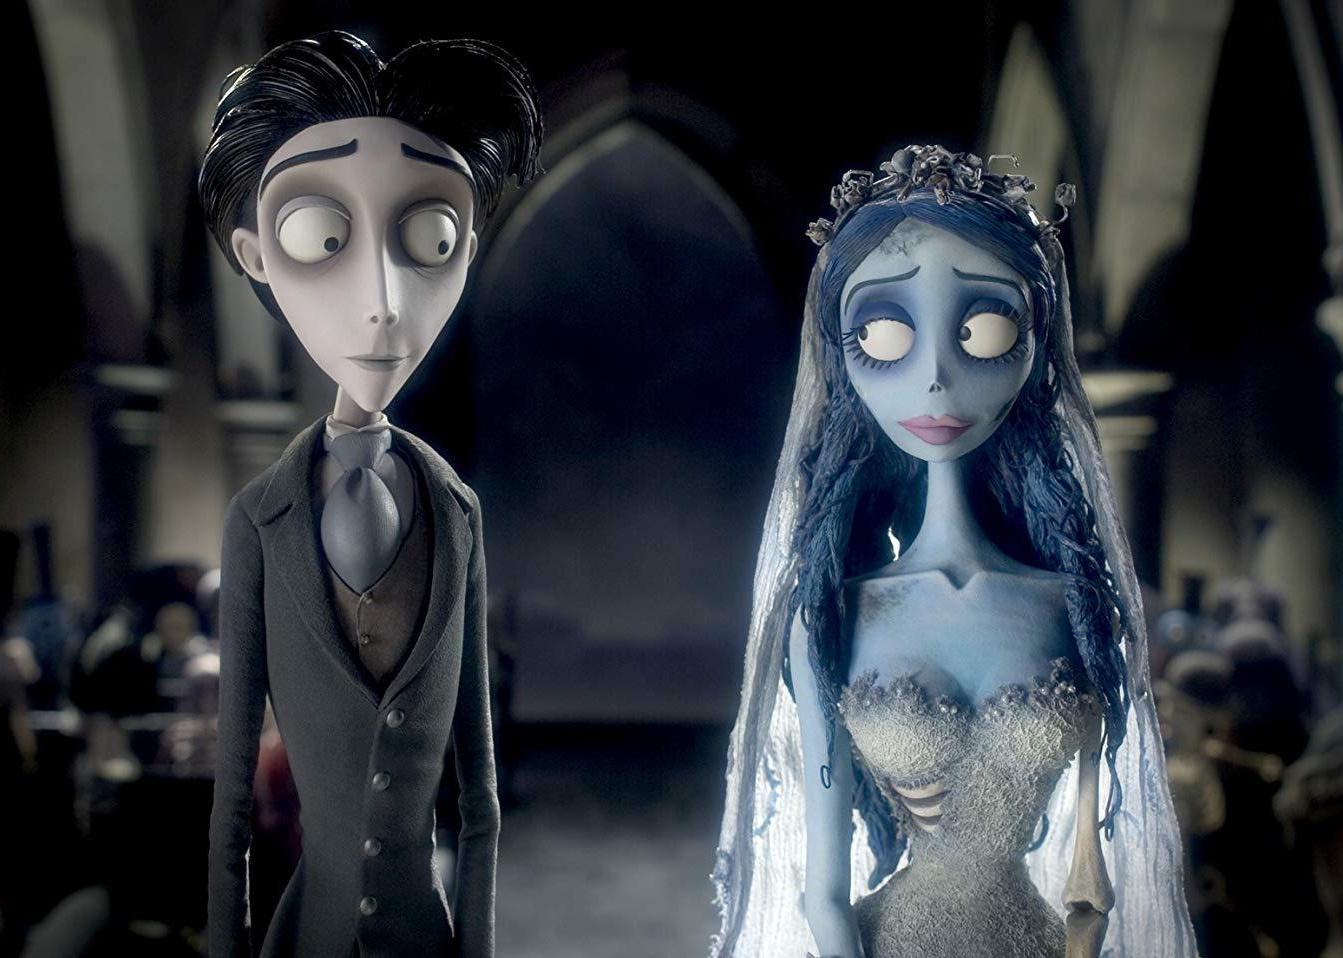 A dark animation of a bride and groom.